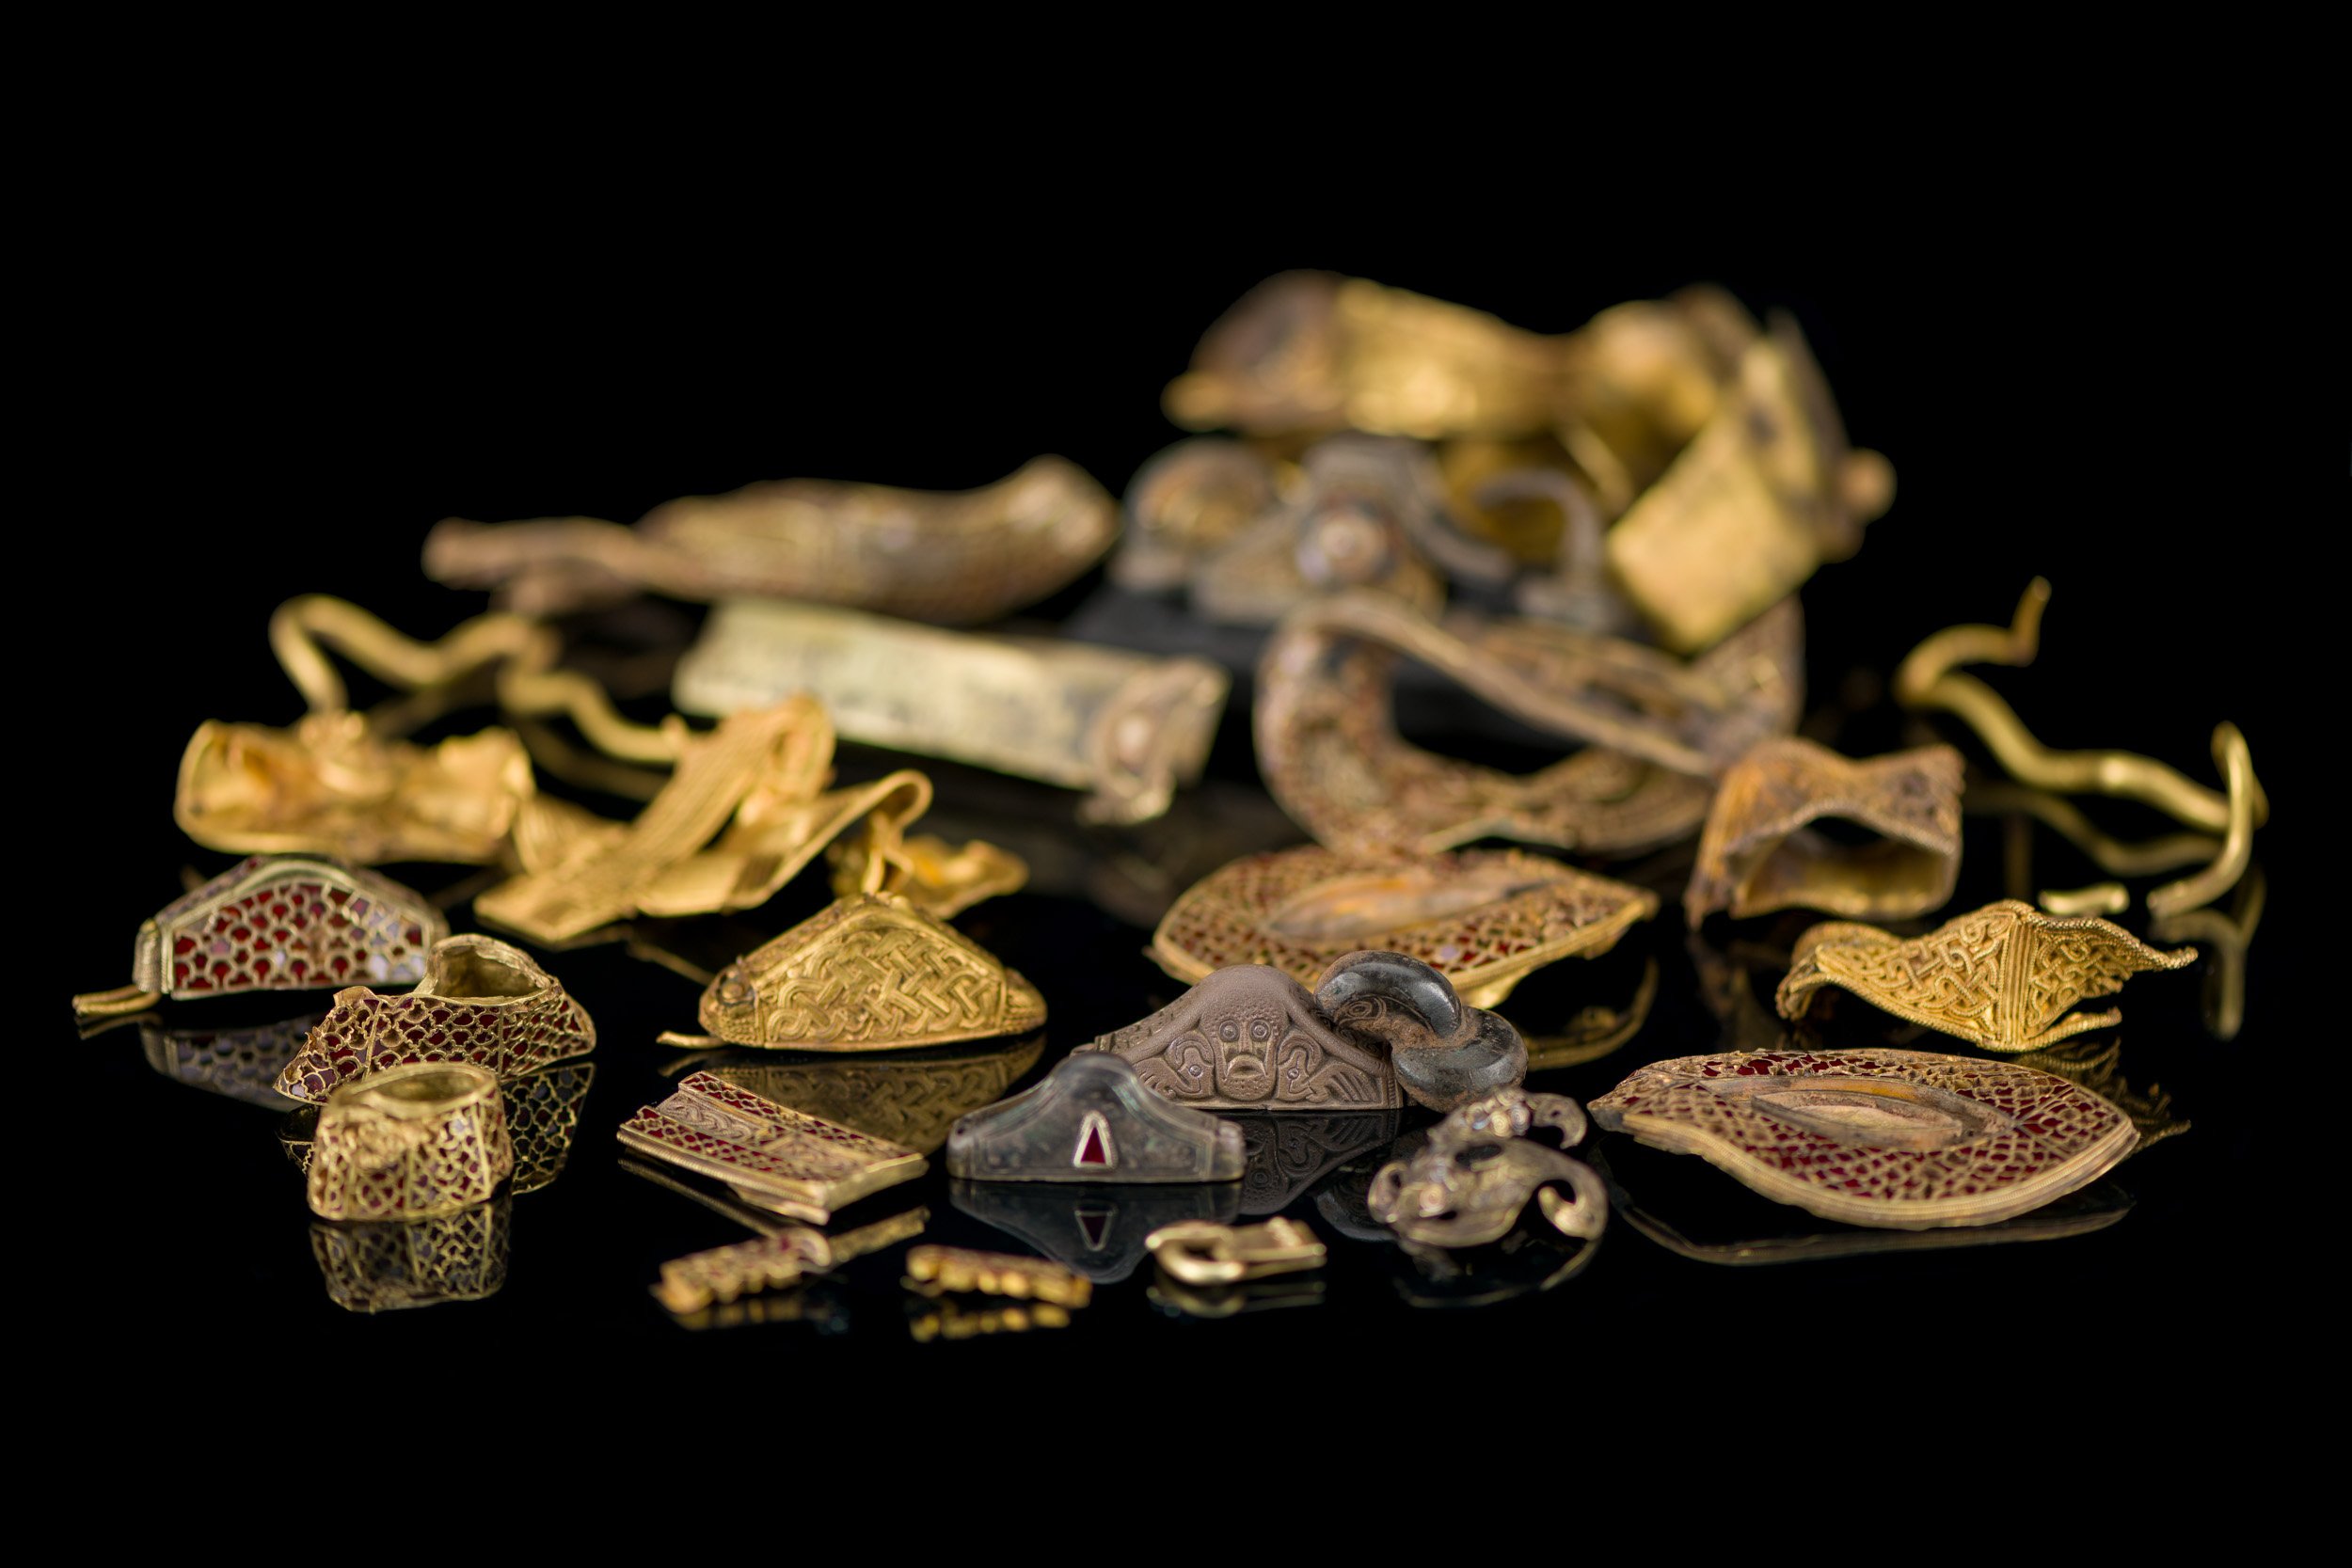 A hoard of decorated gold objects.